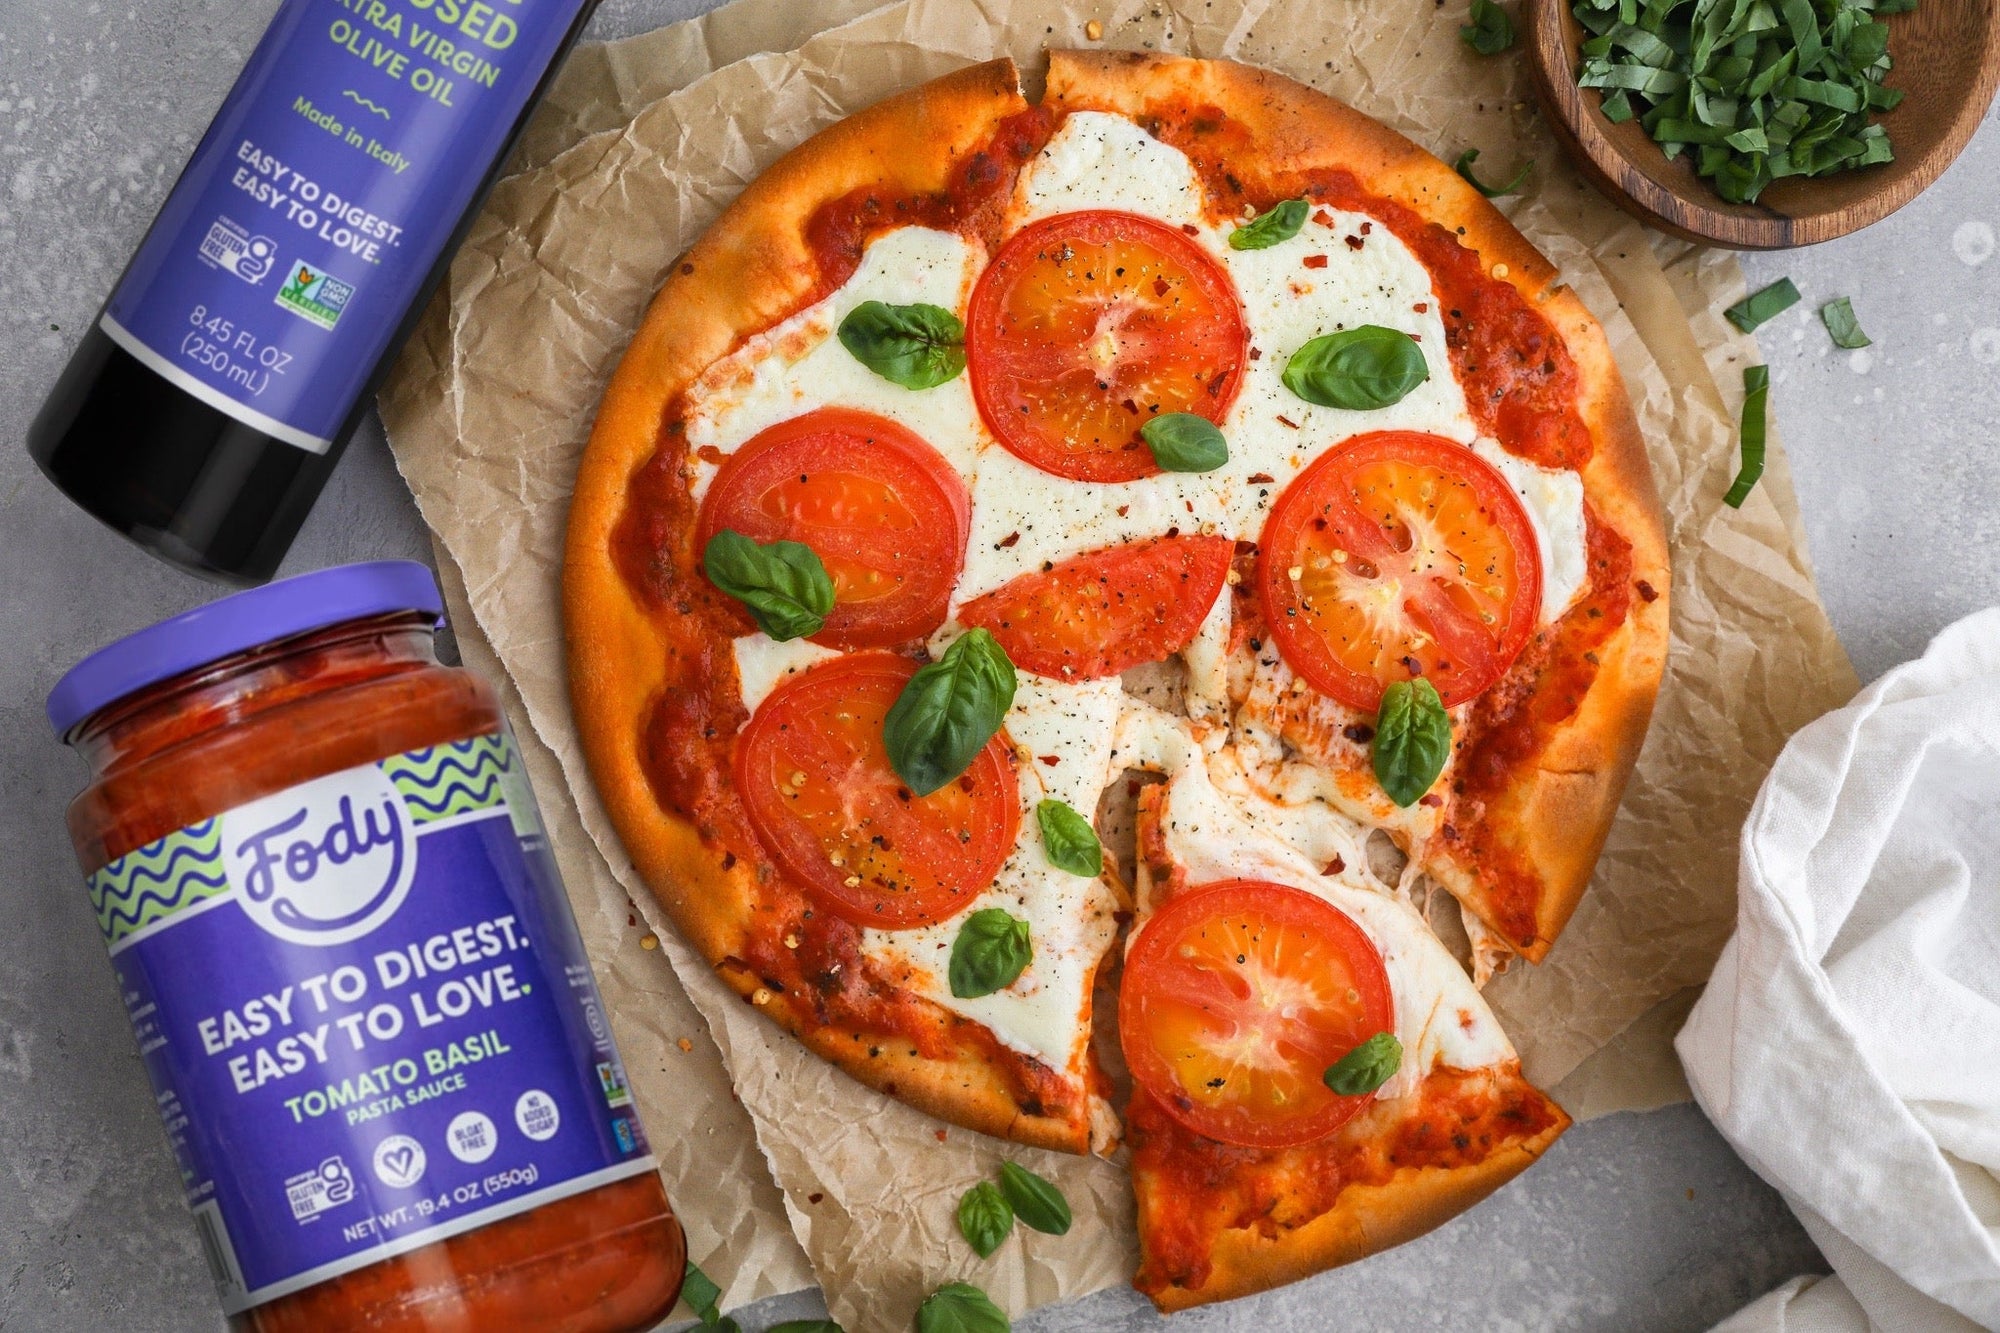 An image of Fody's gluten-free margherita pizza beside two bottles of Fody Tomato Basil sauce and Olive Oil. 